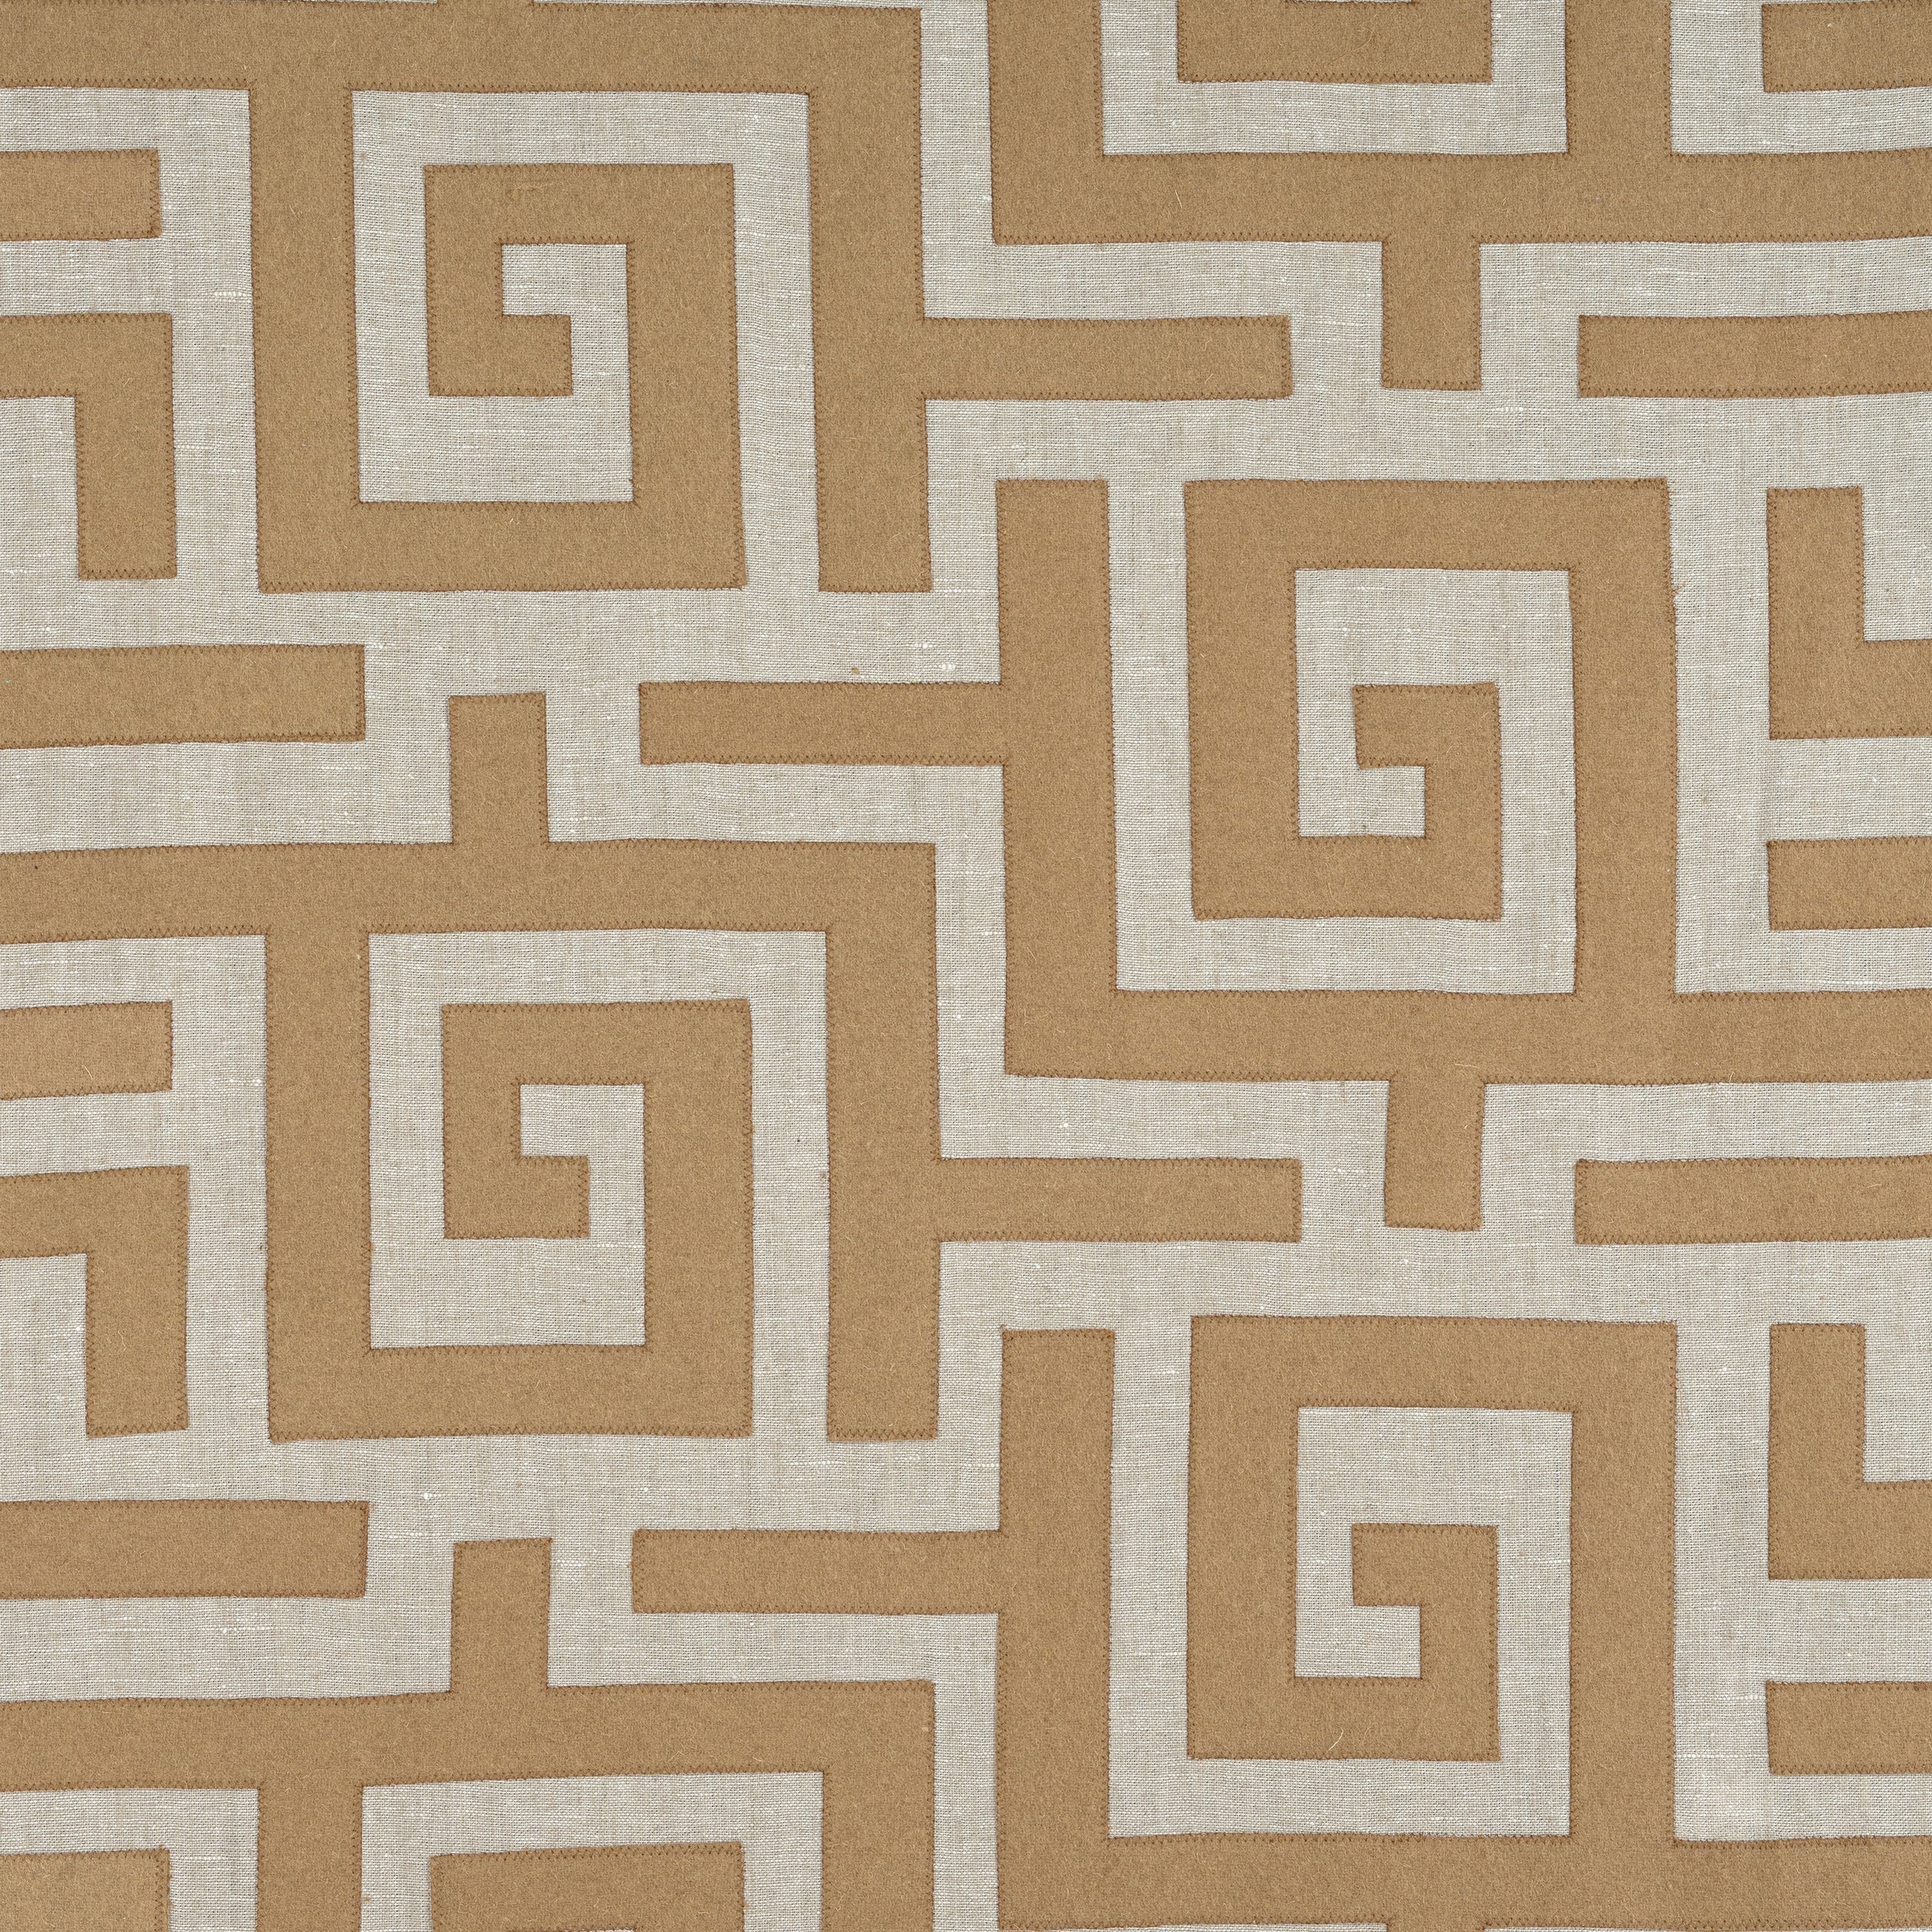 Tulum Applique fabric in wheat on natural color - pattern number W713224 - by Thibaut in the Mesa collection